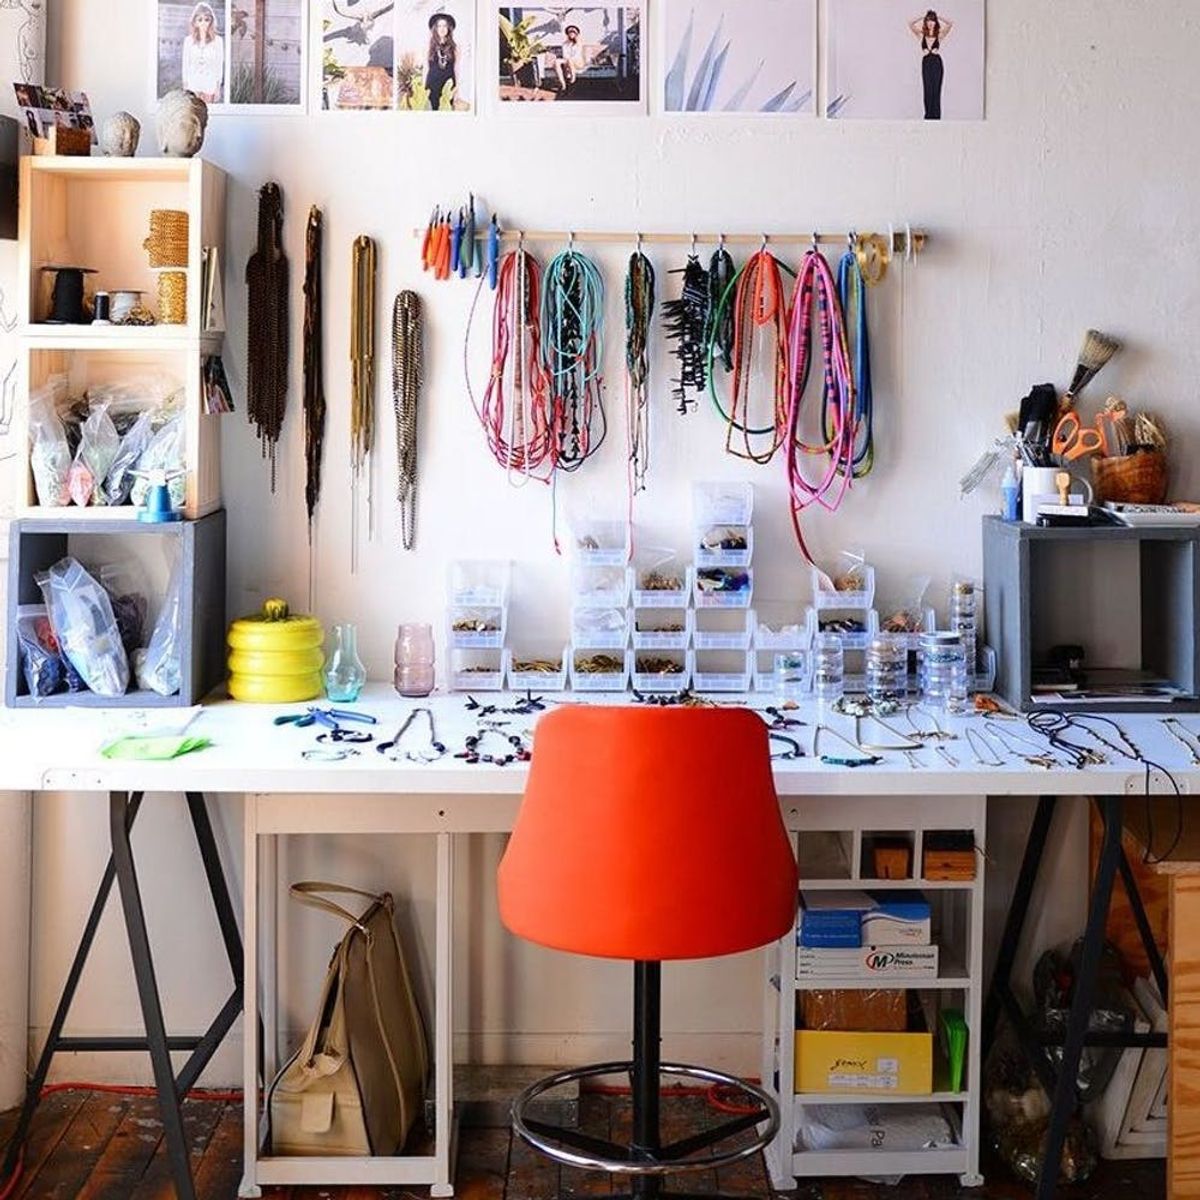 16 Inspiring Ideas for Organizing Your Craft Room